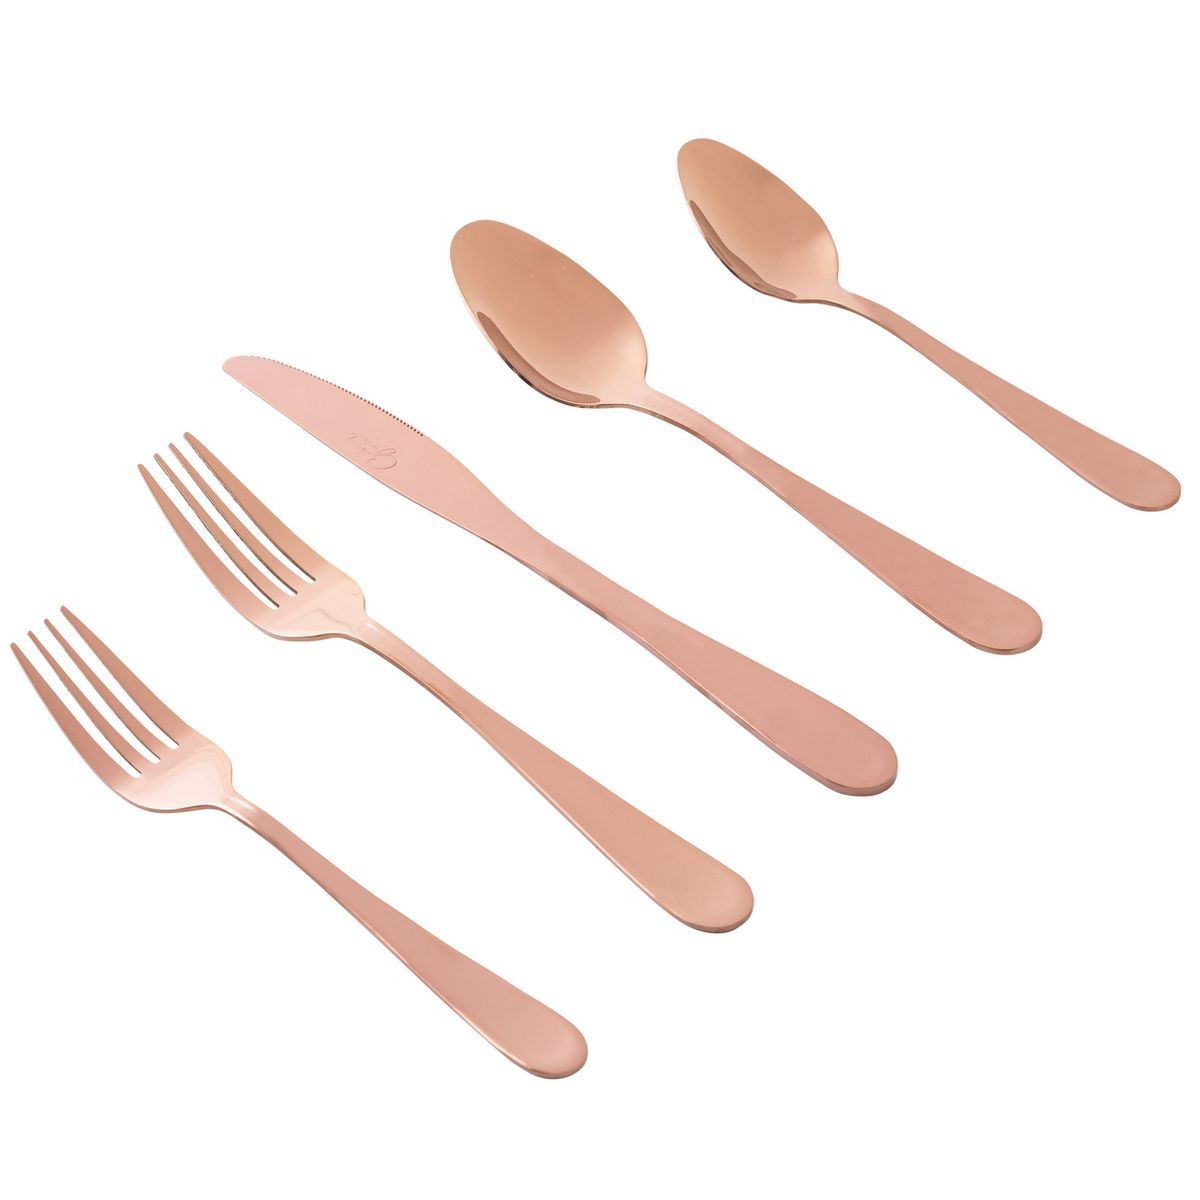 Gibson Home Stravida 20 Piece Flatware Set in Rose Gold Stainless Steel | Target